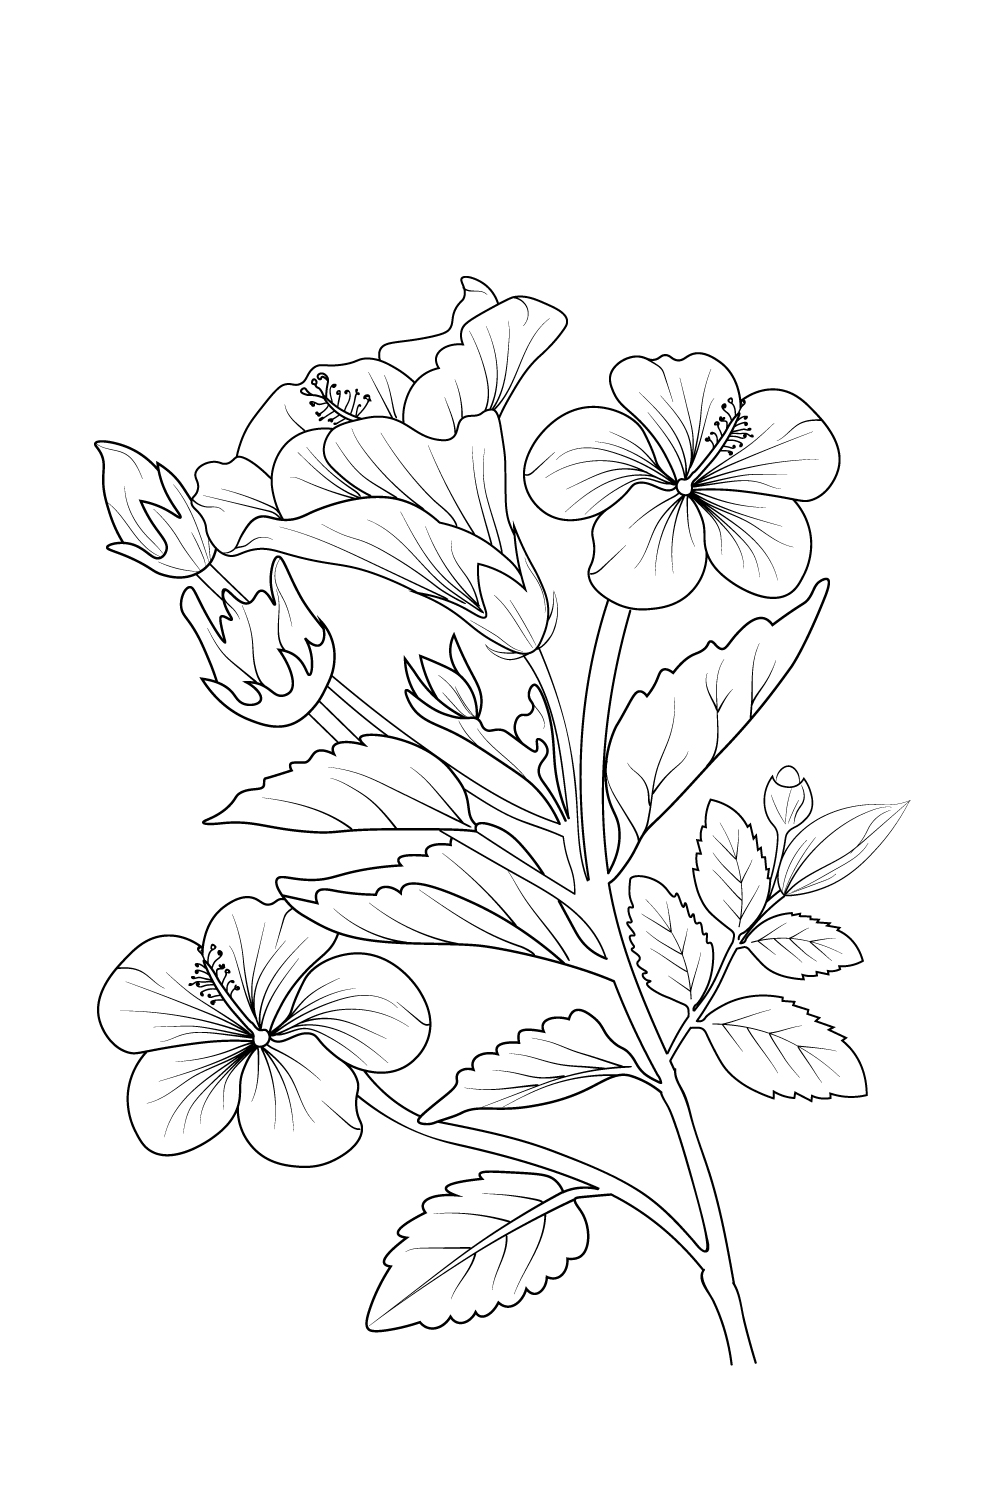 How to draw a China Rose, Hibiscus Flower drawing step by step